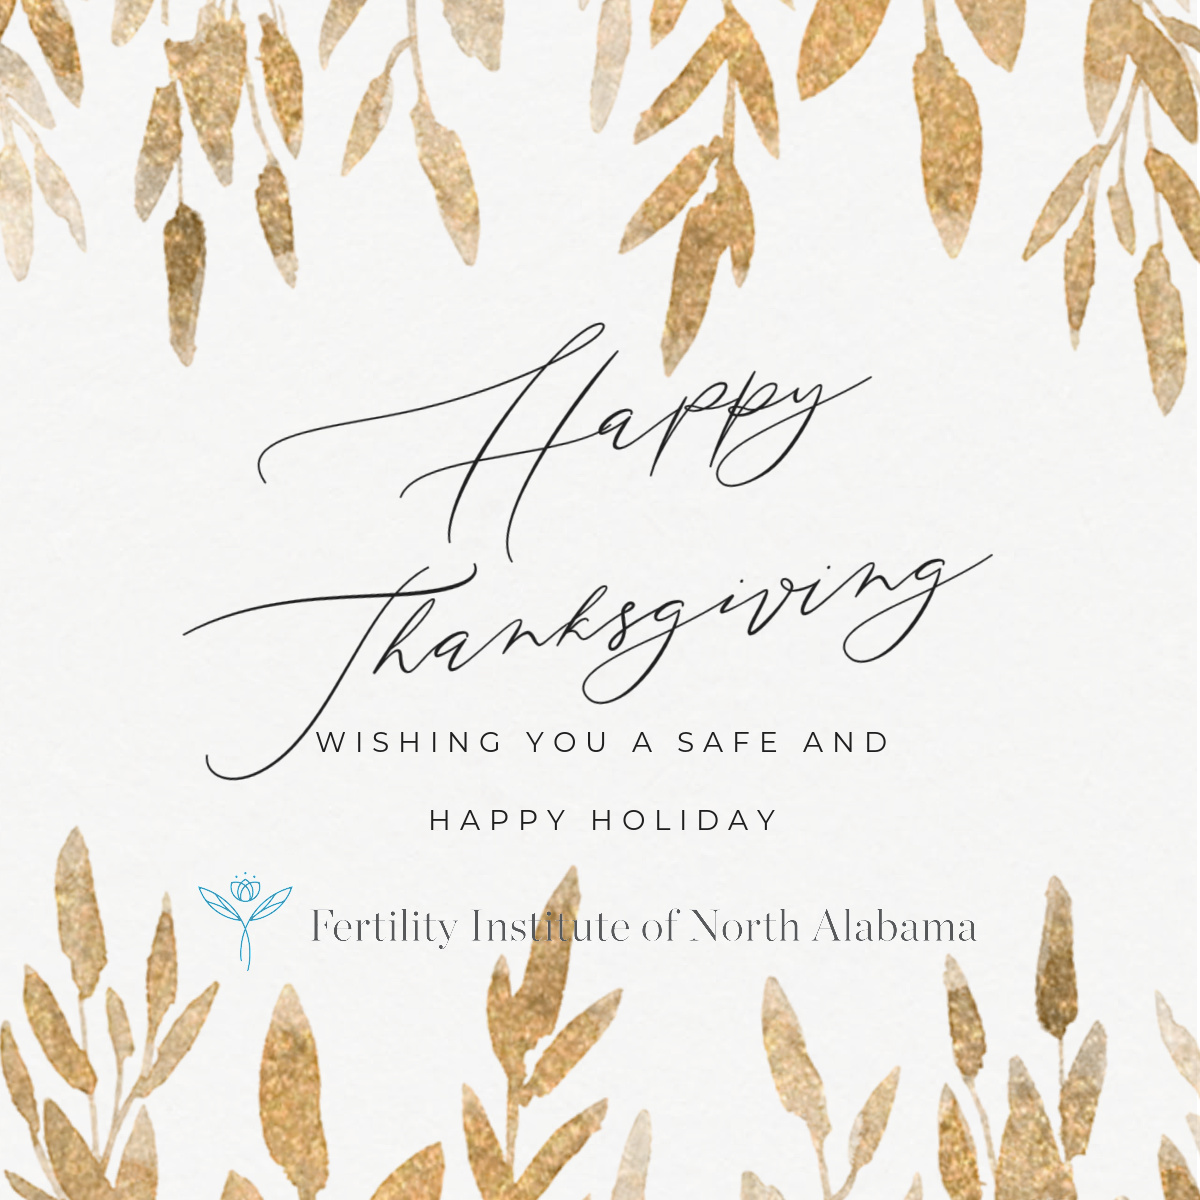 Wishing you a Happy Thanksgiving!🍁🍂